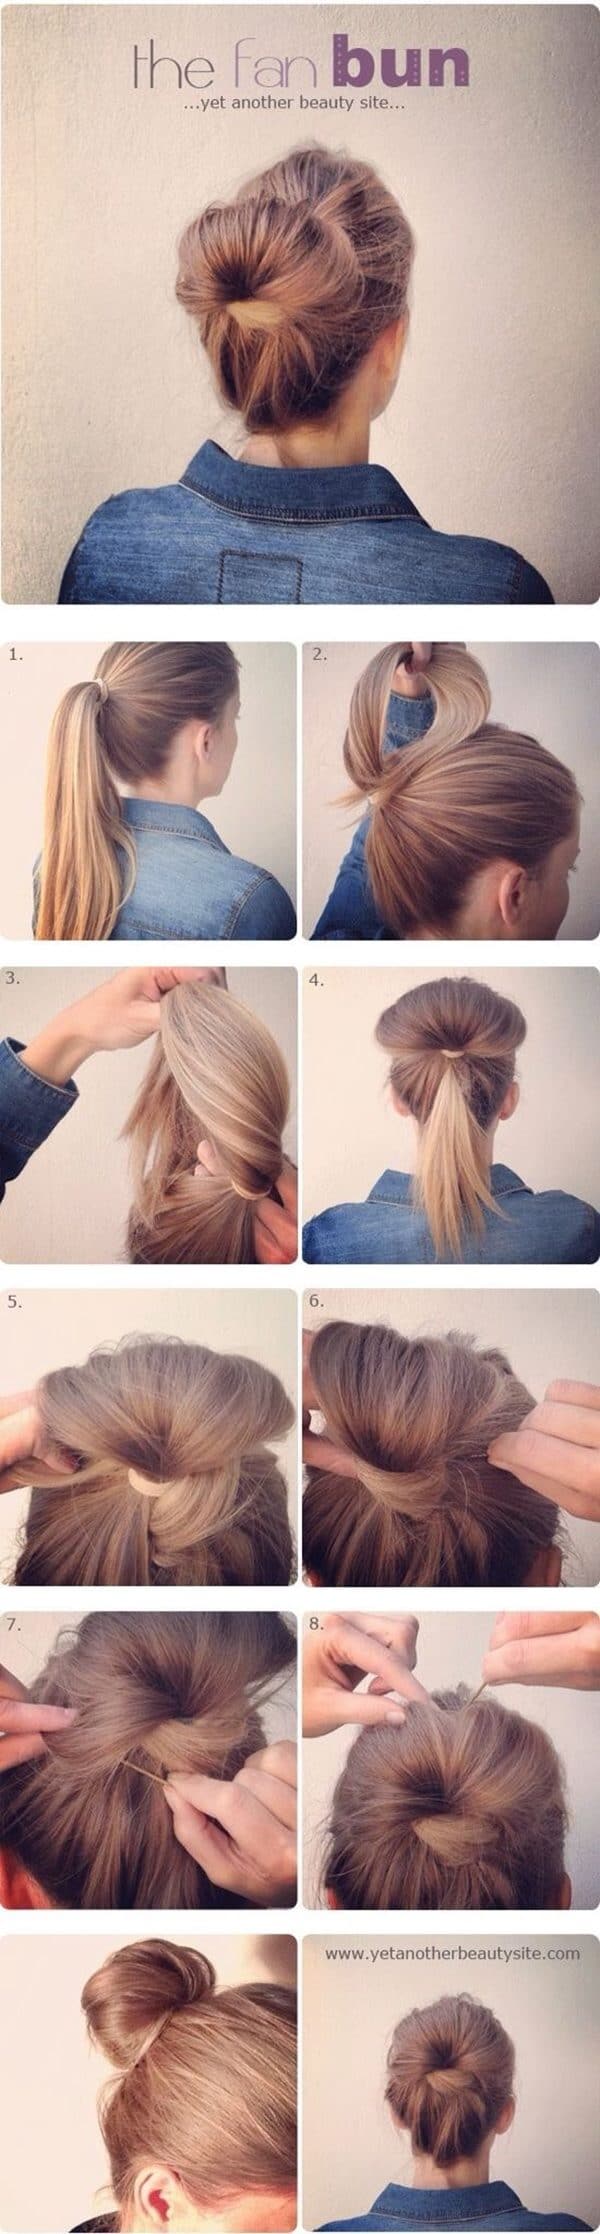 Gorgeous Office Hairstyle Tutorials That Will Make You Look Professional At Work